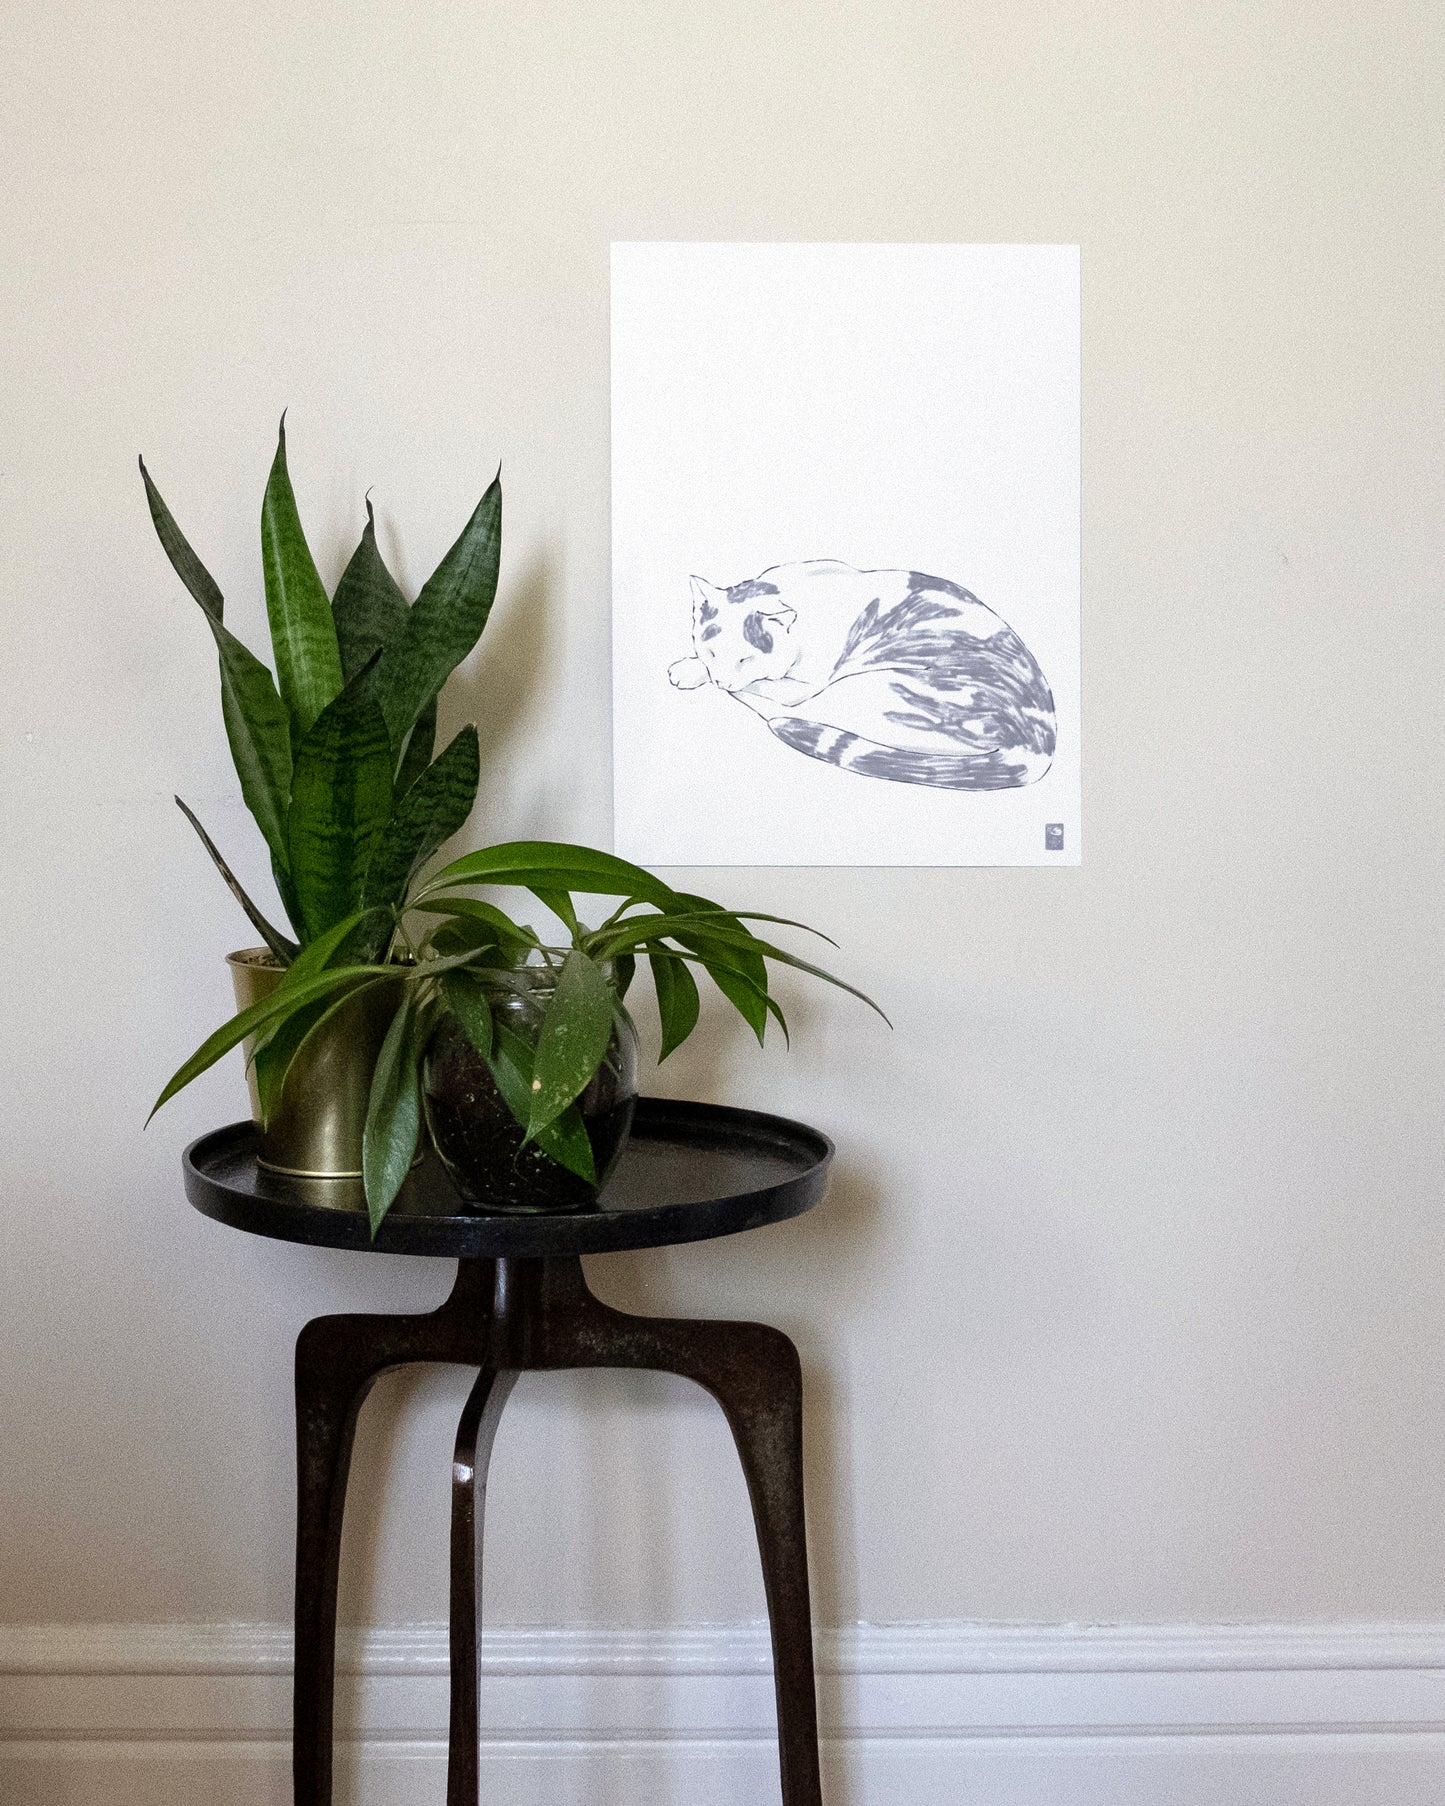 The Original Russell art print unframed with a plant